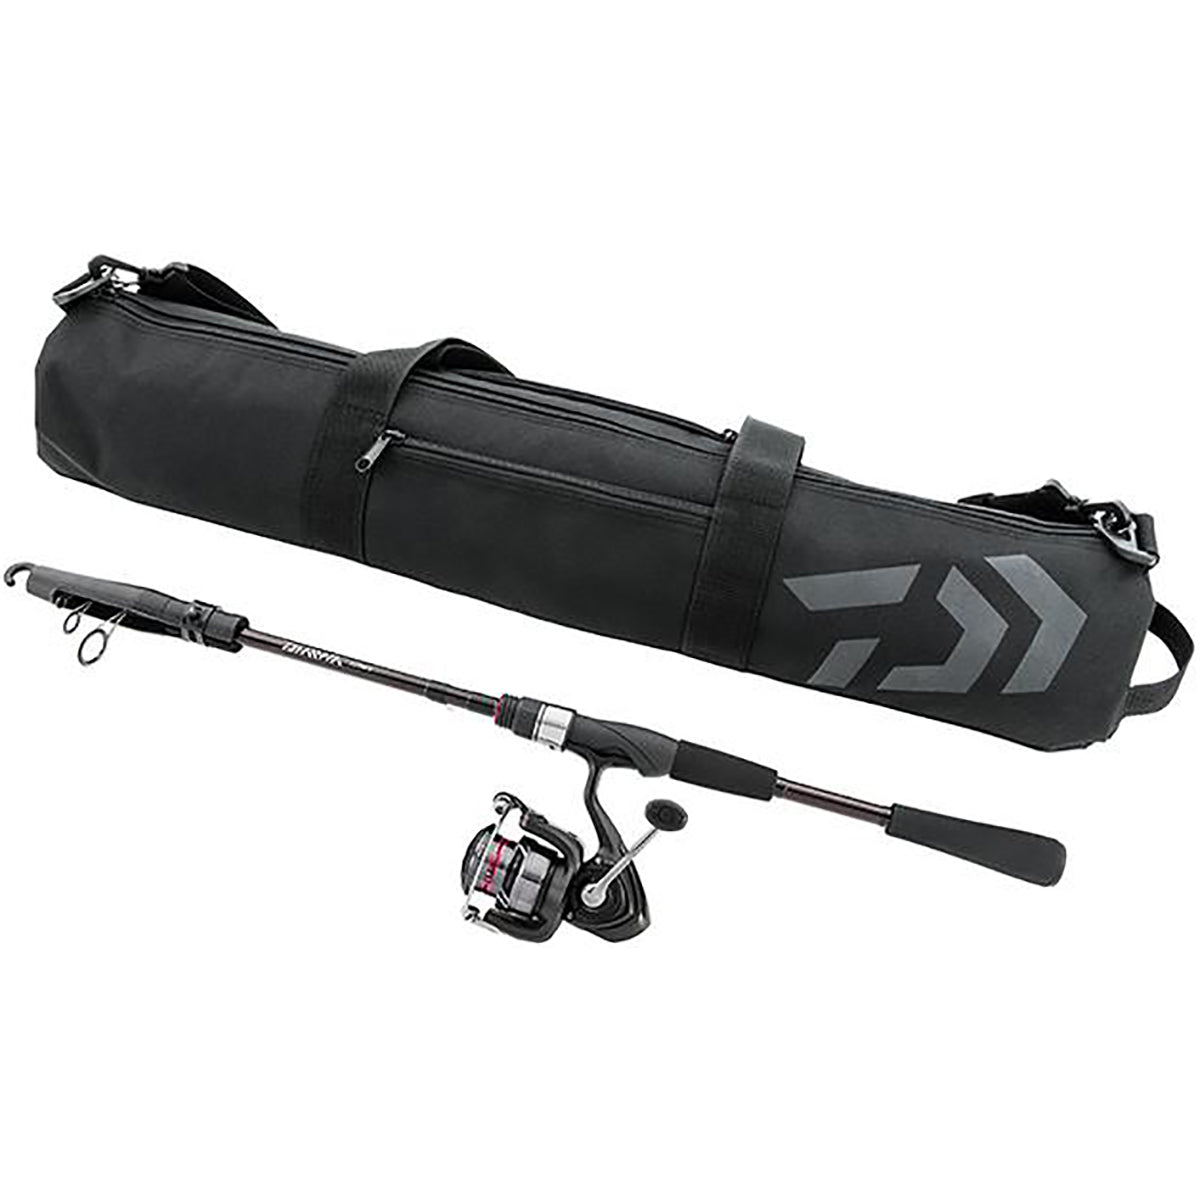 Daiwa Carbon Case Travel Spinning Rod and Reel Combo Kit